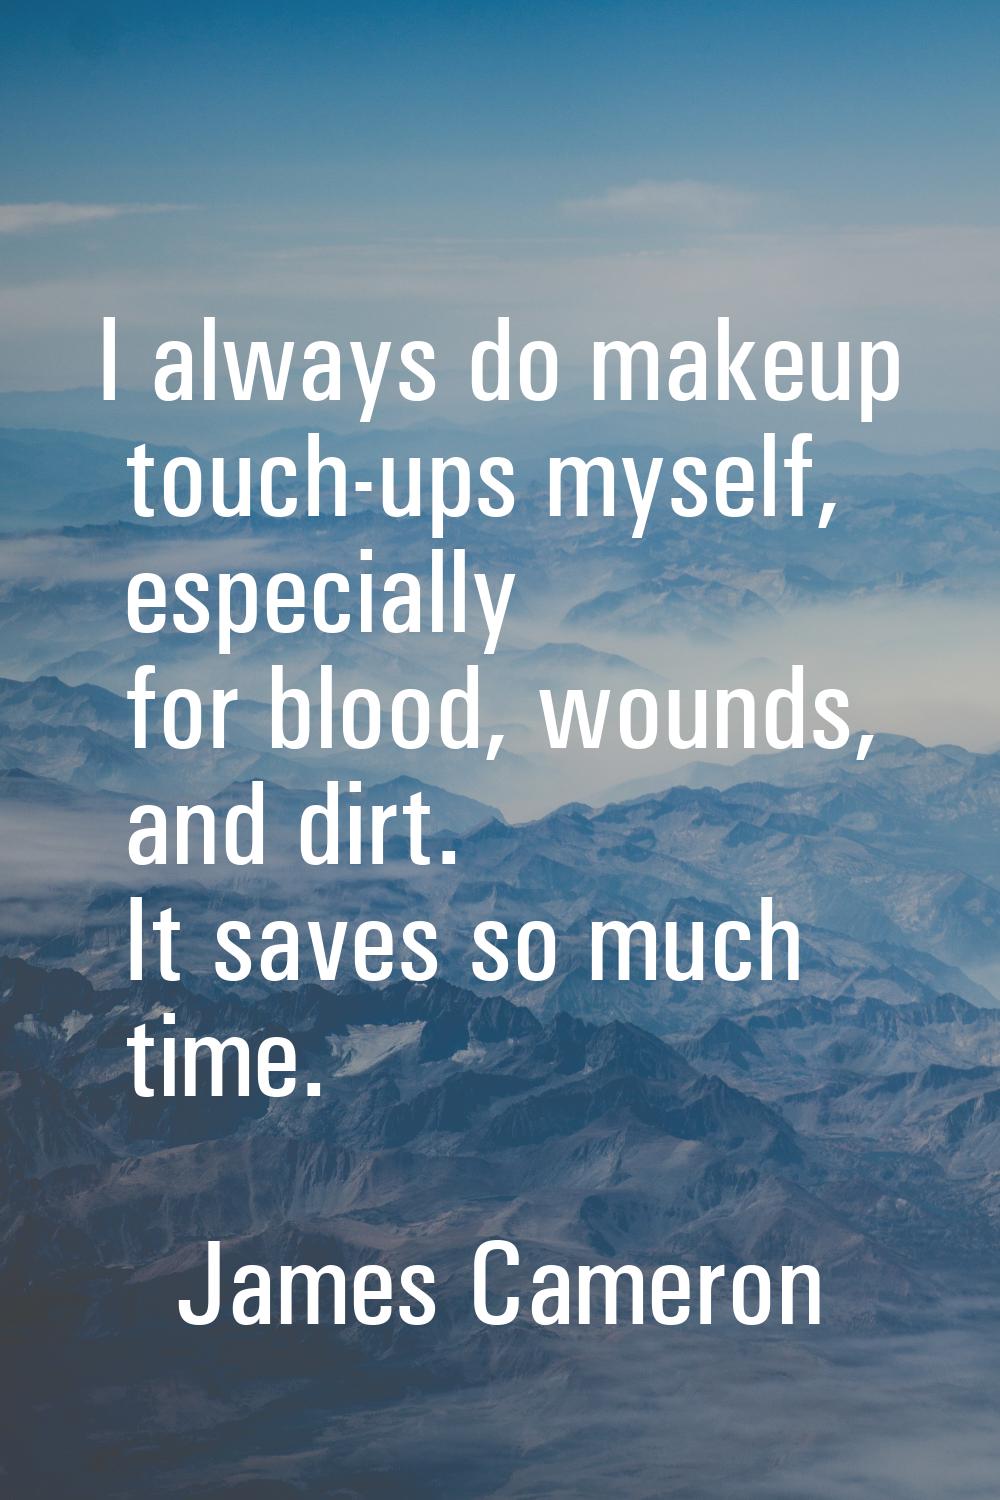 I always do makeup touch-ups myself, especially for blood, wounds, and dirt. It saves so much time.